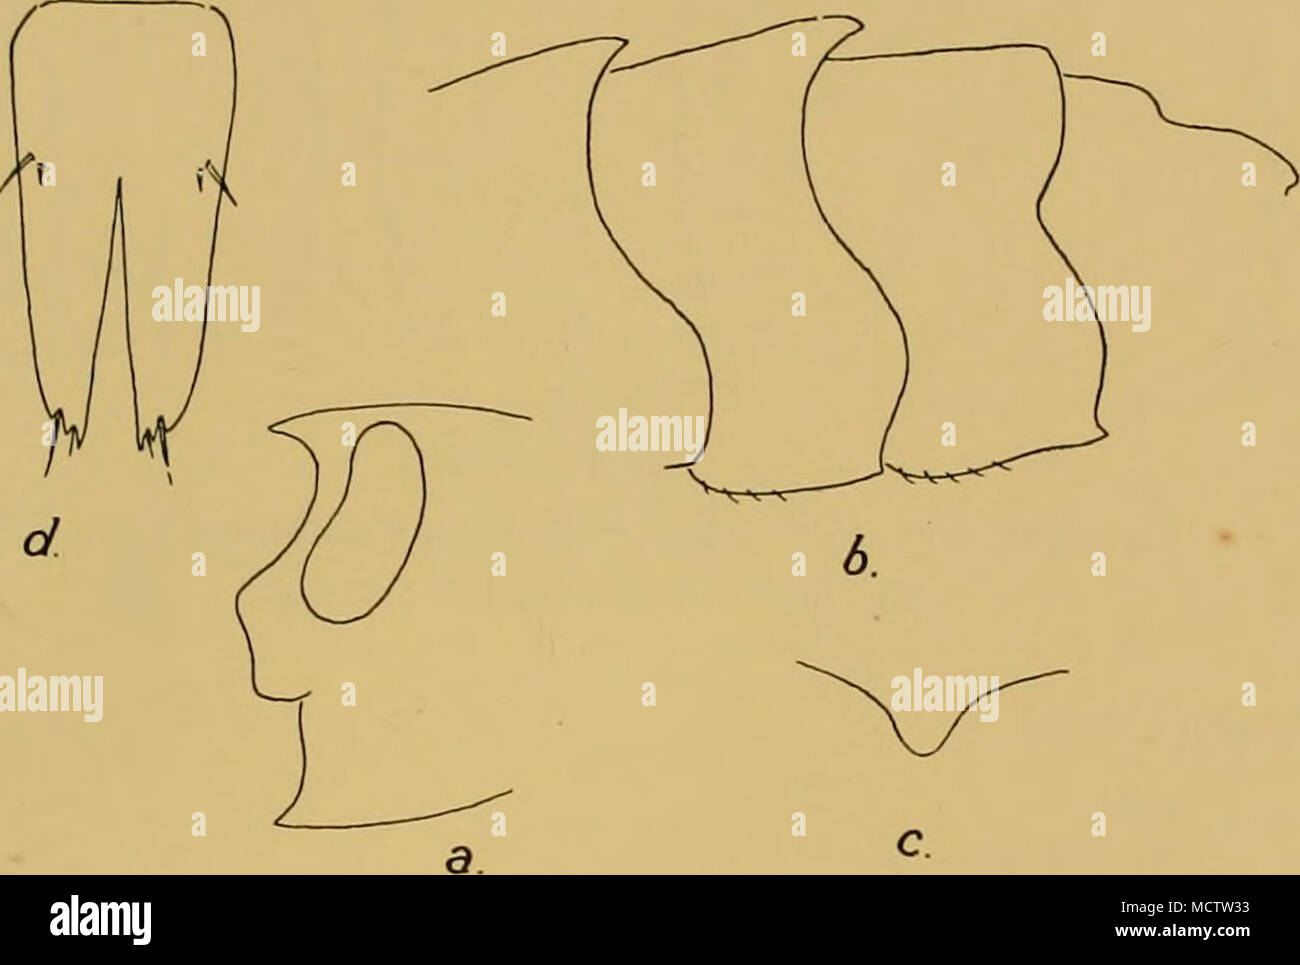 . Fig. 129. Paramoera bidentata, n.sp. a. Head. b. Pleon segments 1-4. c. Dorsal view of tooth on segment 2. d. Telson. Remarks. Similar to edouardi as regards integument, telson, and pleon segment 3, but separated by the head, dentate pleon segments 1 and 2, broader gnathopods, and oblong 2nd joints of peraeopods 3-5. Although not represented in the Discovery collection, it is convenient to describe this species alongside other species of the genus. Stebbing, 1906, pp. 364, 729. Schellenberg, 1926, p. 363. Stebbing, 1906, pp. 421, 732. Barnard, 1916, p. 189. Family GAMMARIDAE Genus Melita, Le Stock Photo